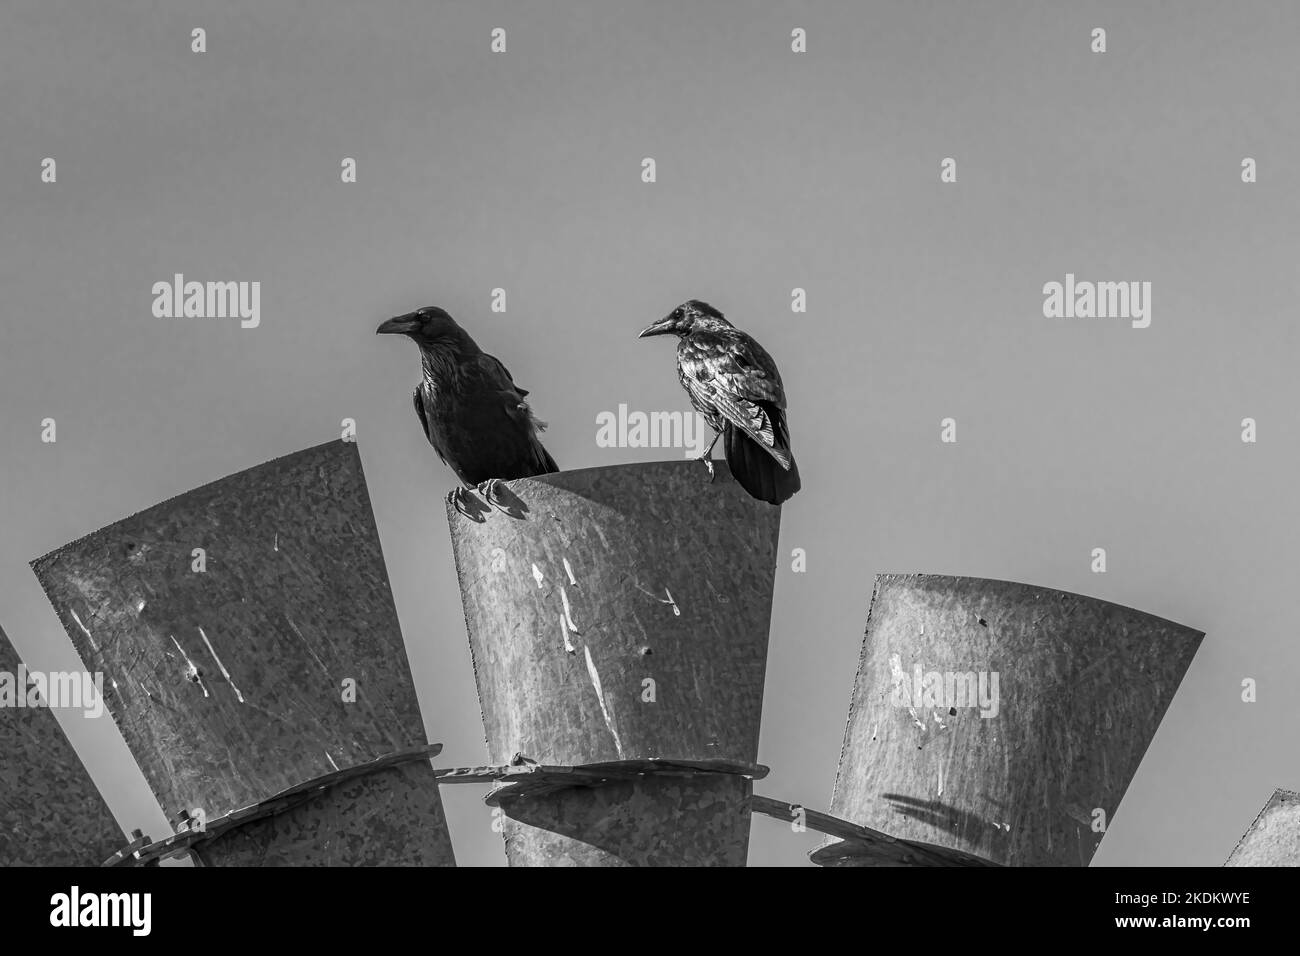 Two Crows Sitting on a Metal Windmill Stock Photo